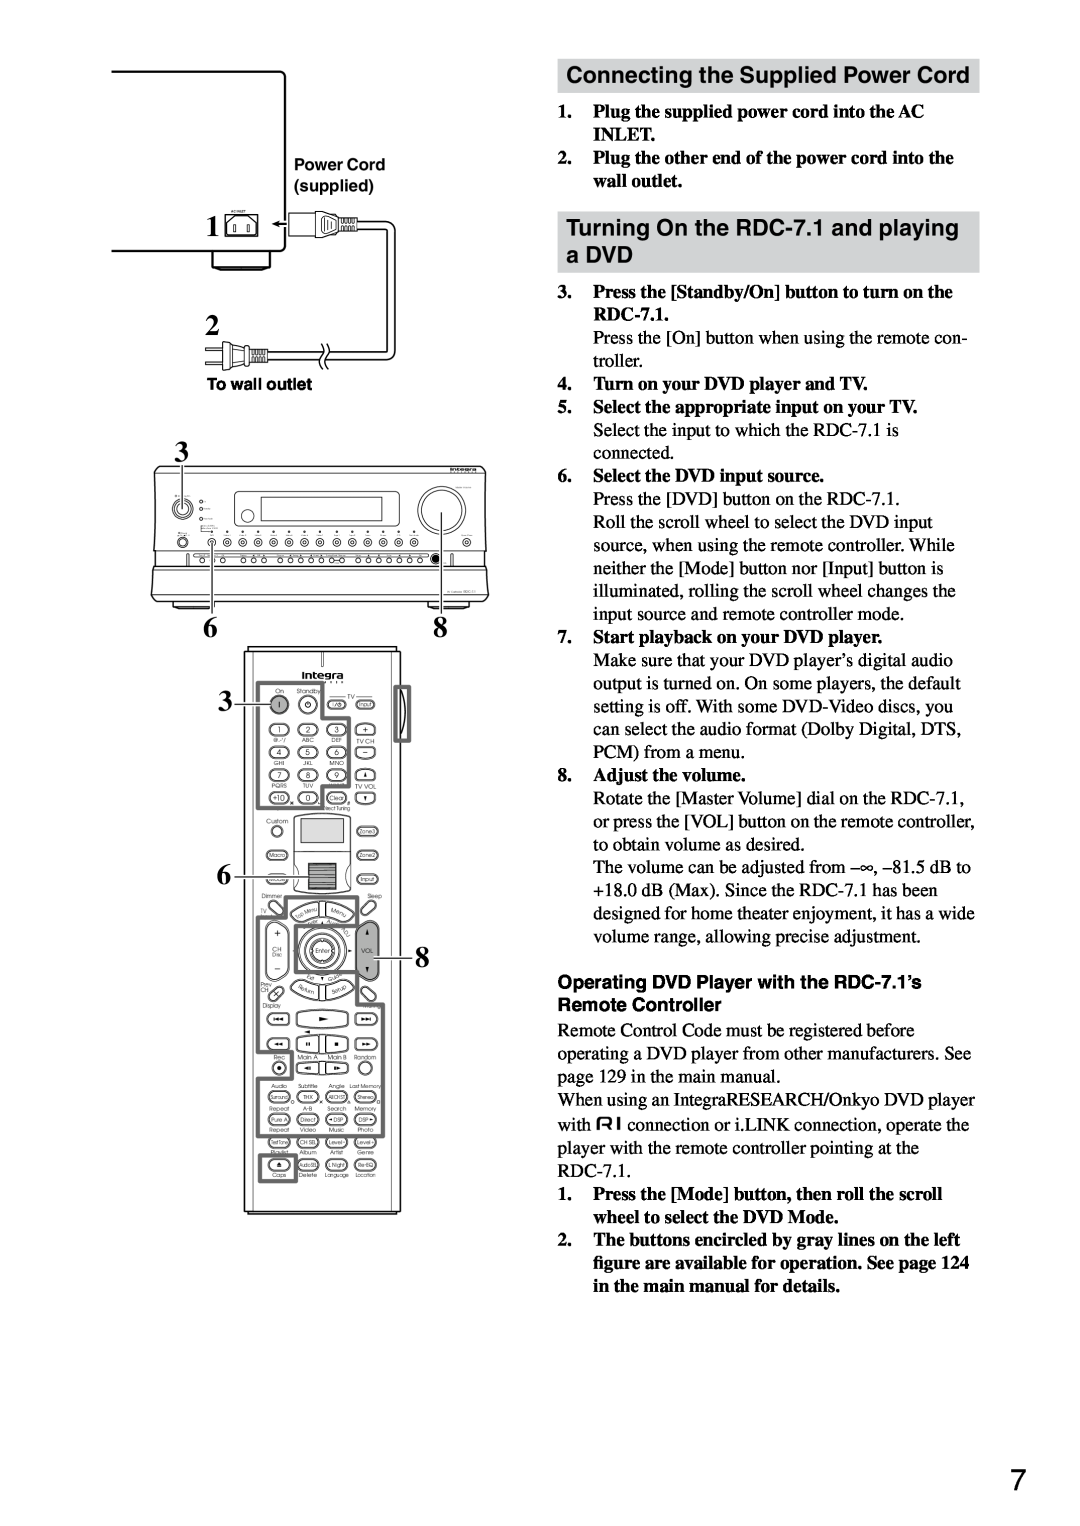 Integra instruction manual Connecting the Supplied Power Cord, Turning On the RDC-7.1and playing aDVD 